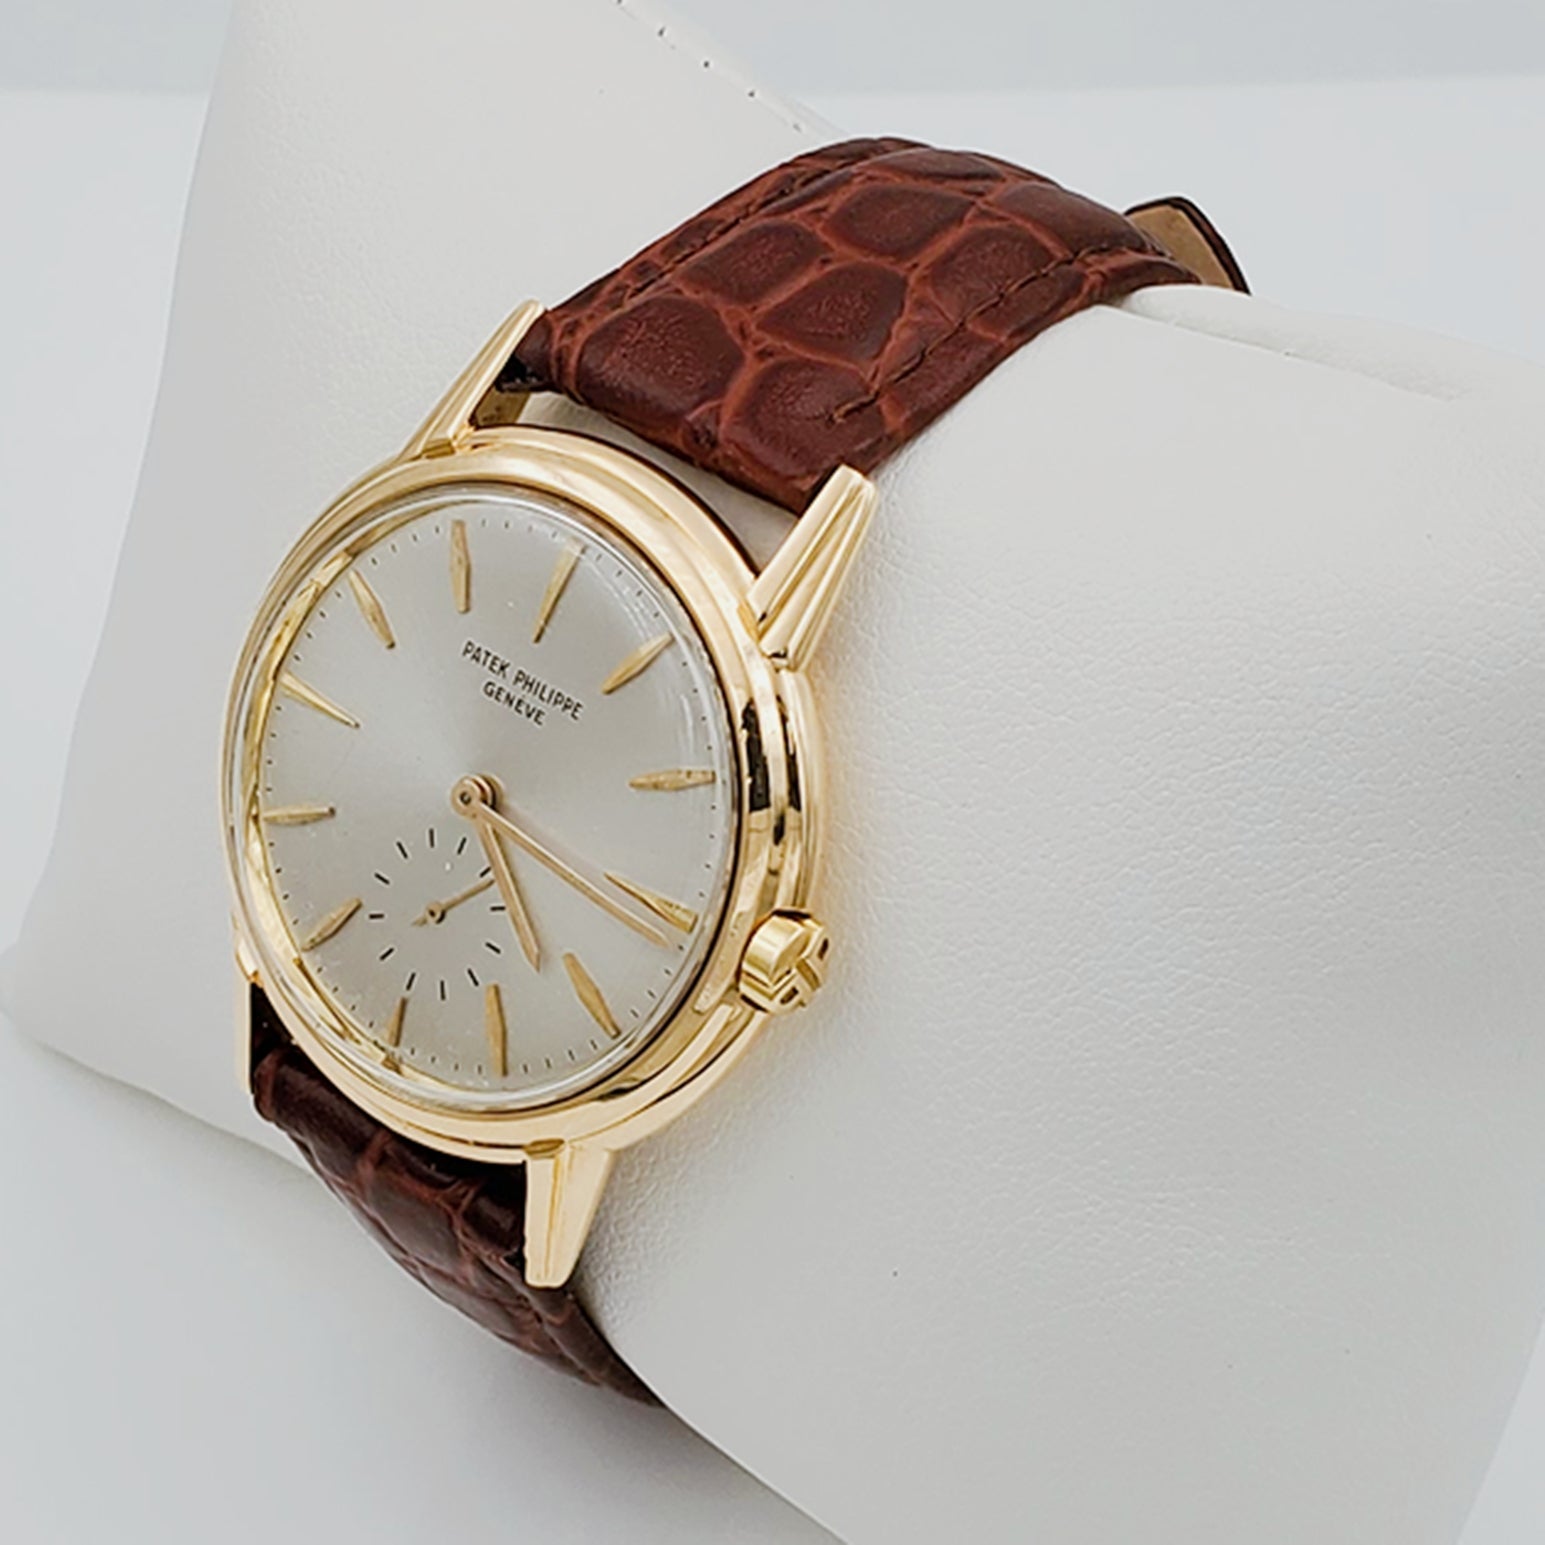 Patek Philippe Men's Calatrava 1961 Vintage 18K Gold Yellow Gold Automatic Wrist Watch with Circa Movements. (Pre-Owned Model 3444)